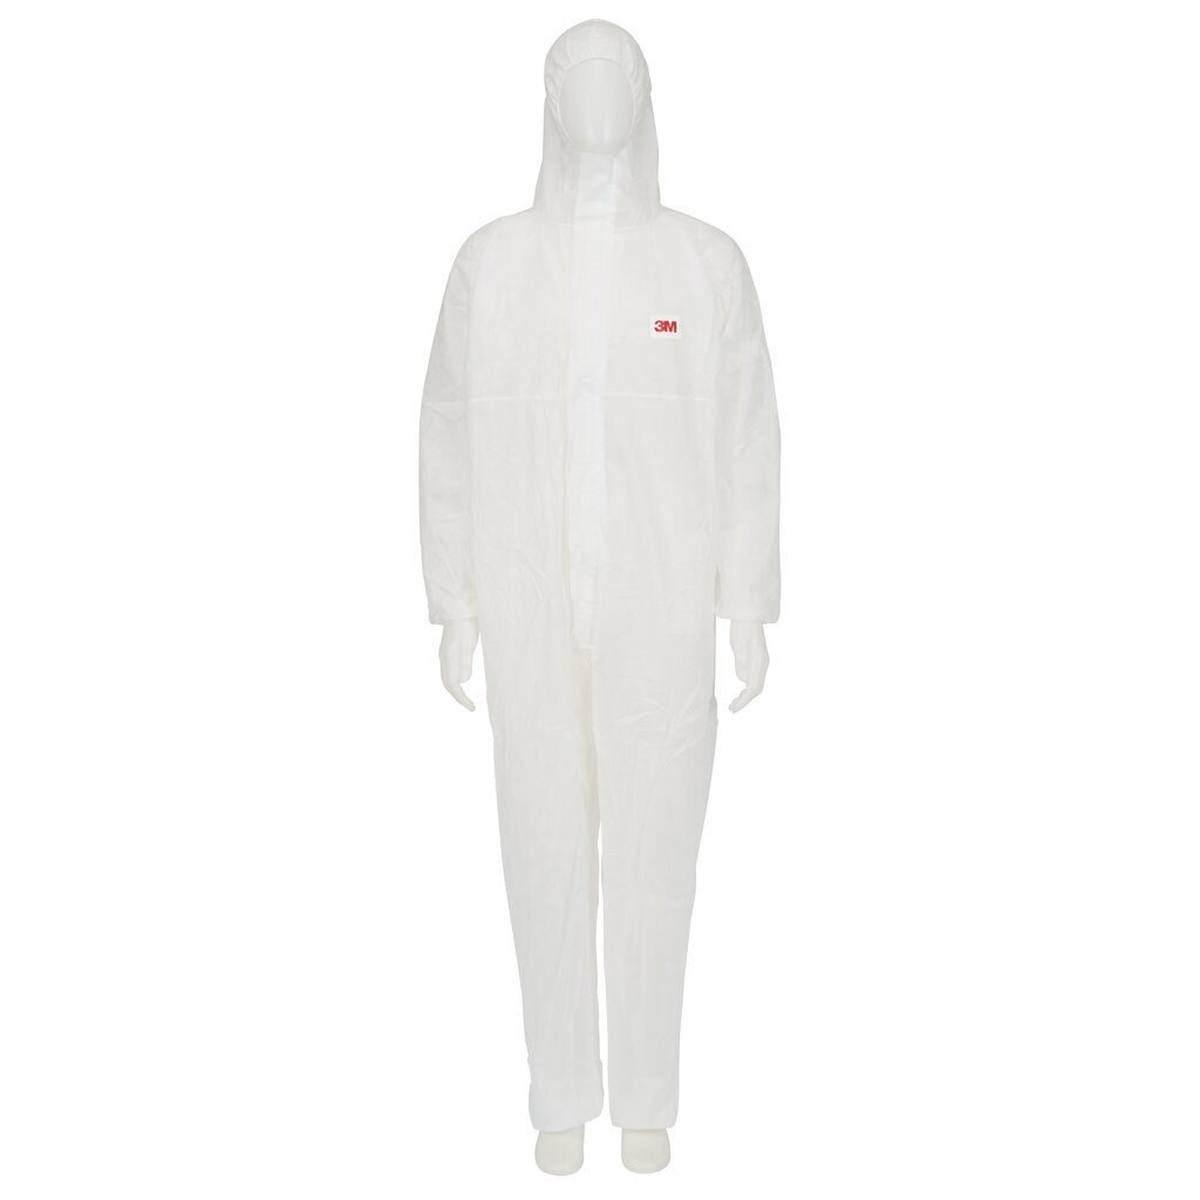 3M 4500 W coverall, white, CE, size L, material polypropylene, elastic band finish